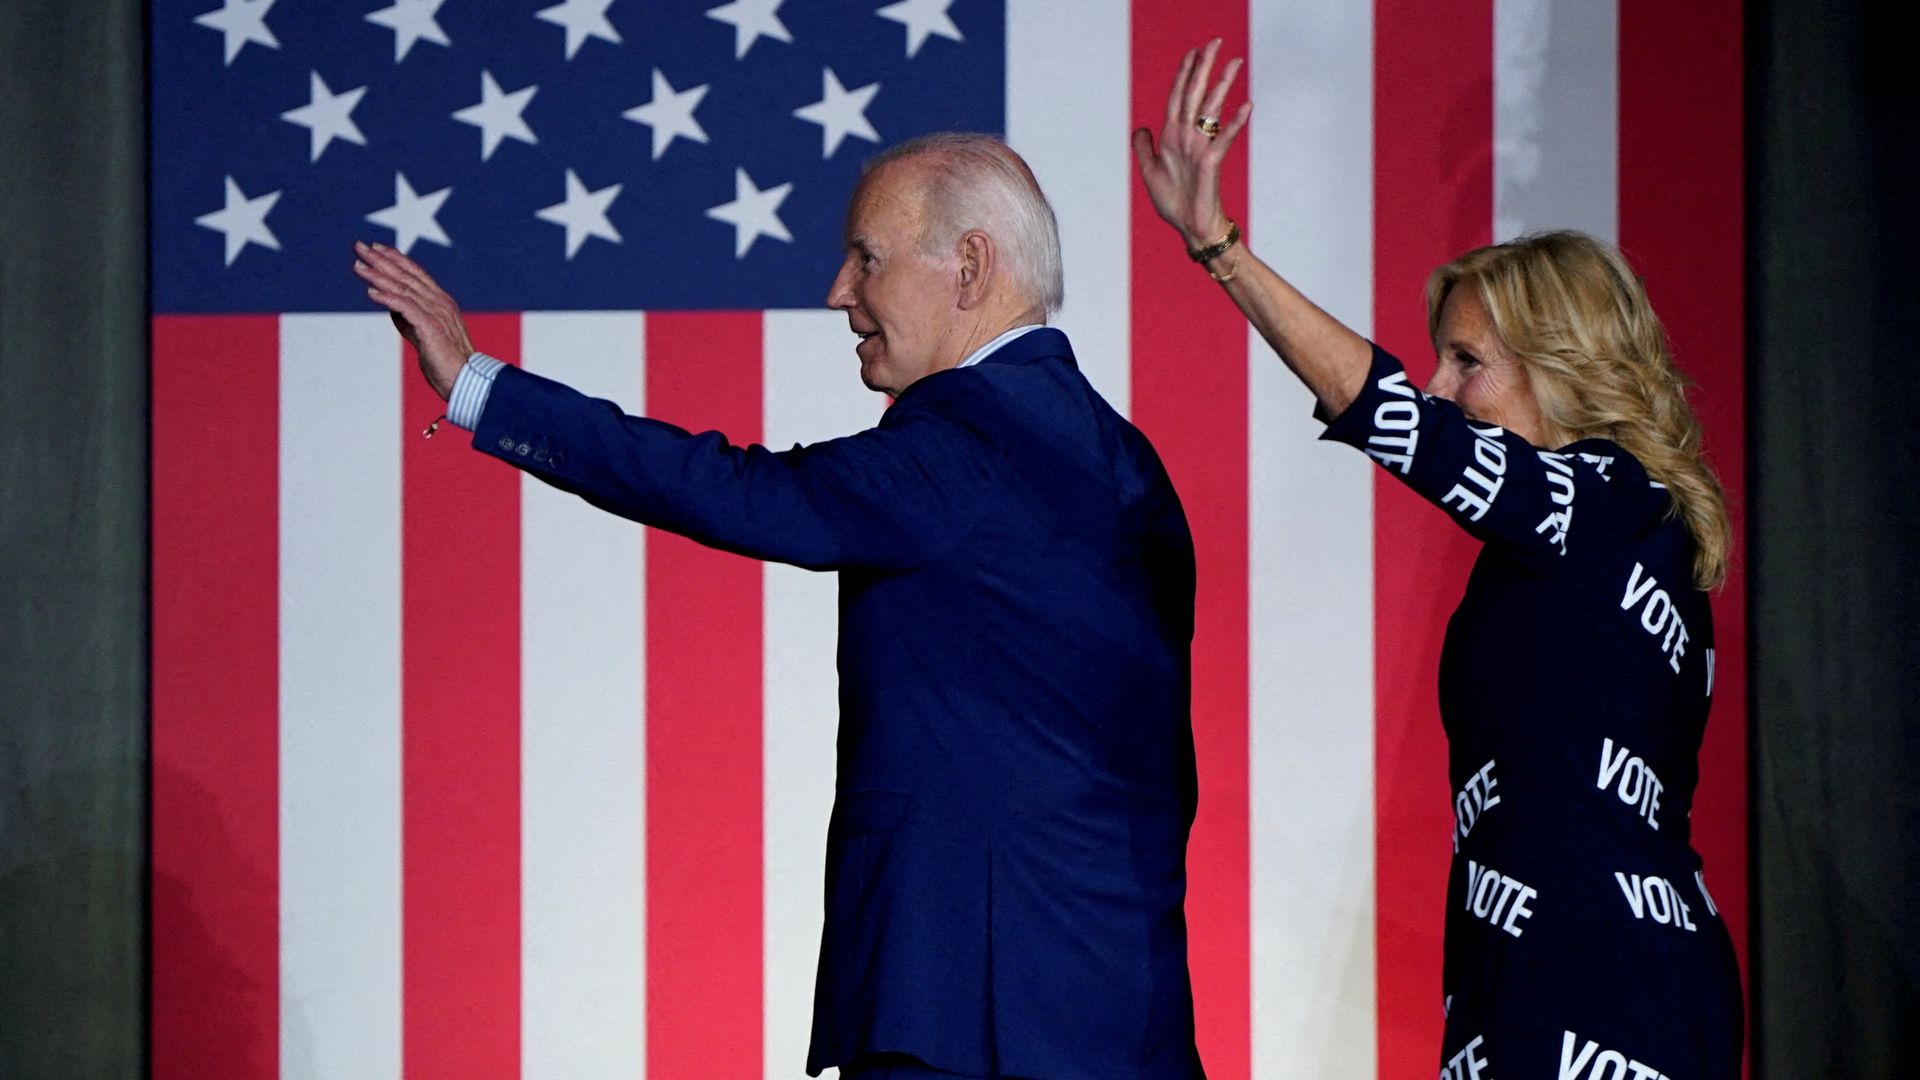 S. President Joe Biden and first lady Jill Biden wave as they exit the stage during a campaign rally in Raleigh